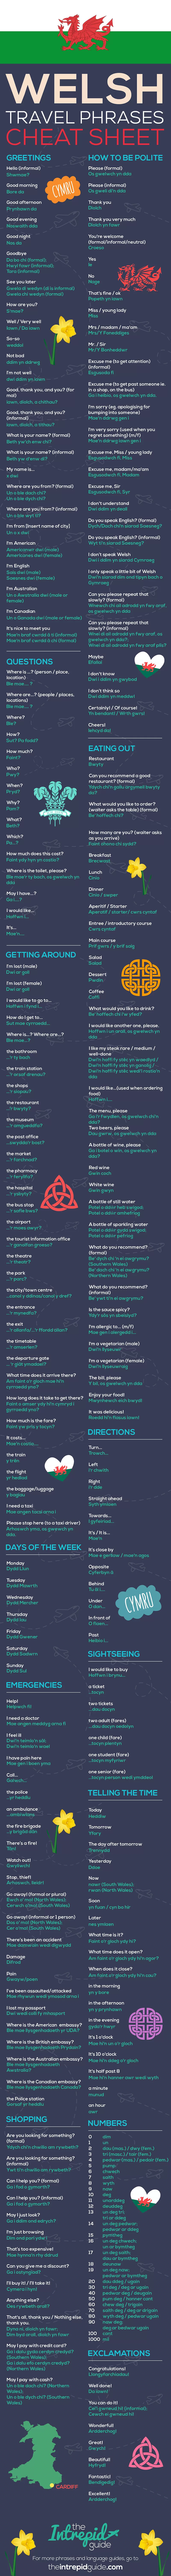 Essential Welsh Phrases Printable Infographic